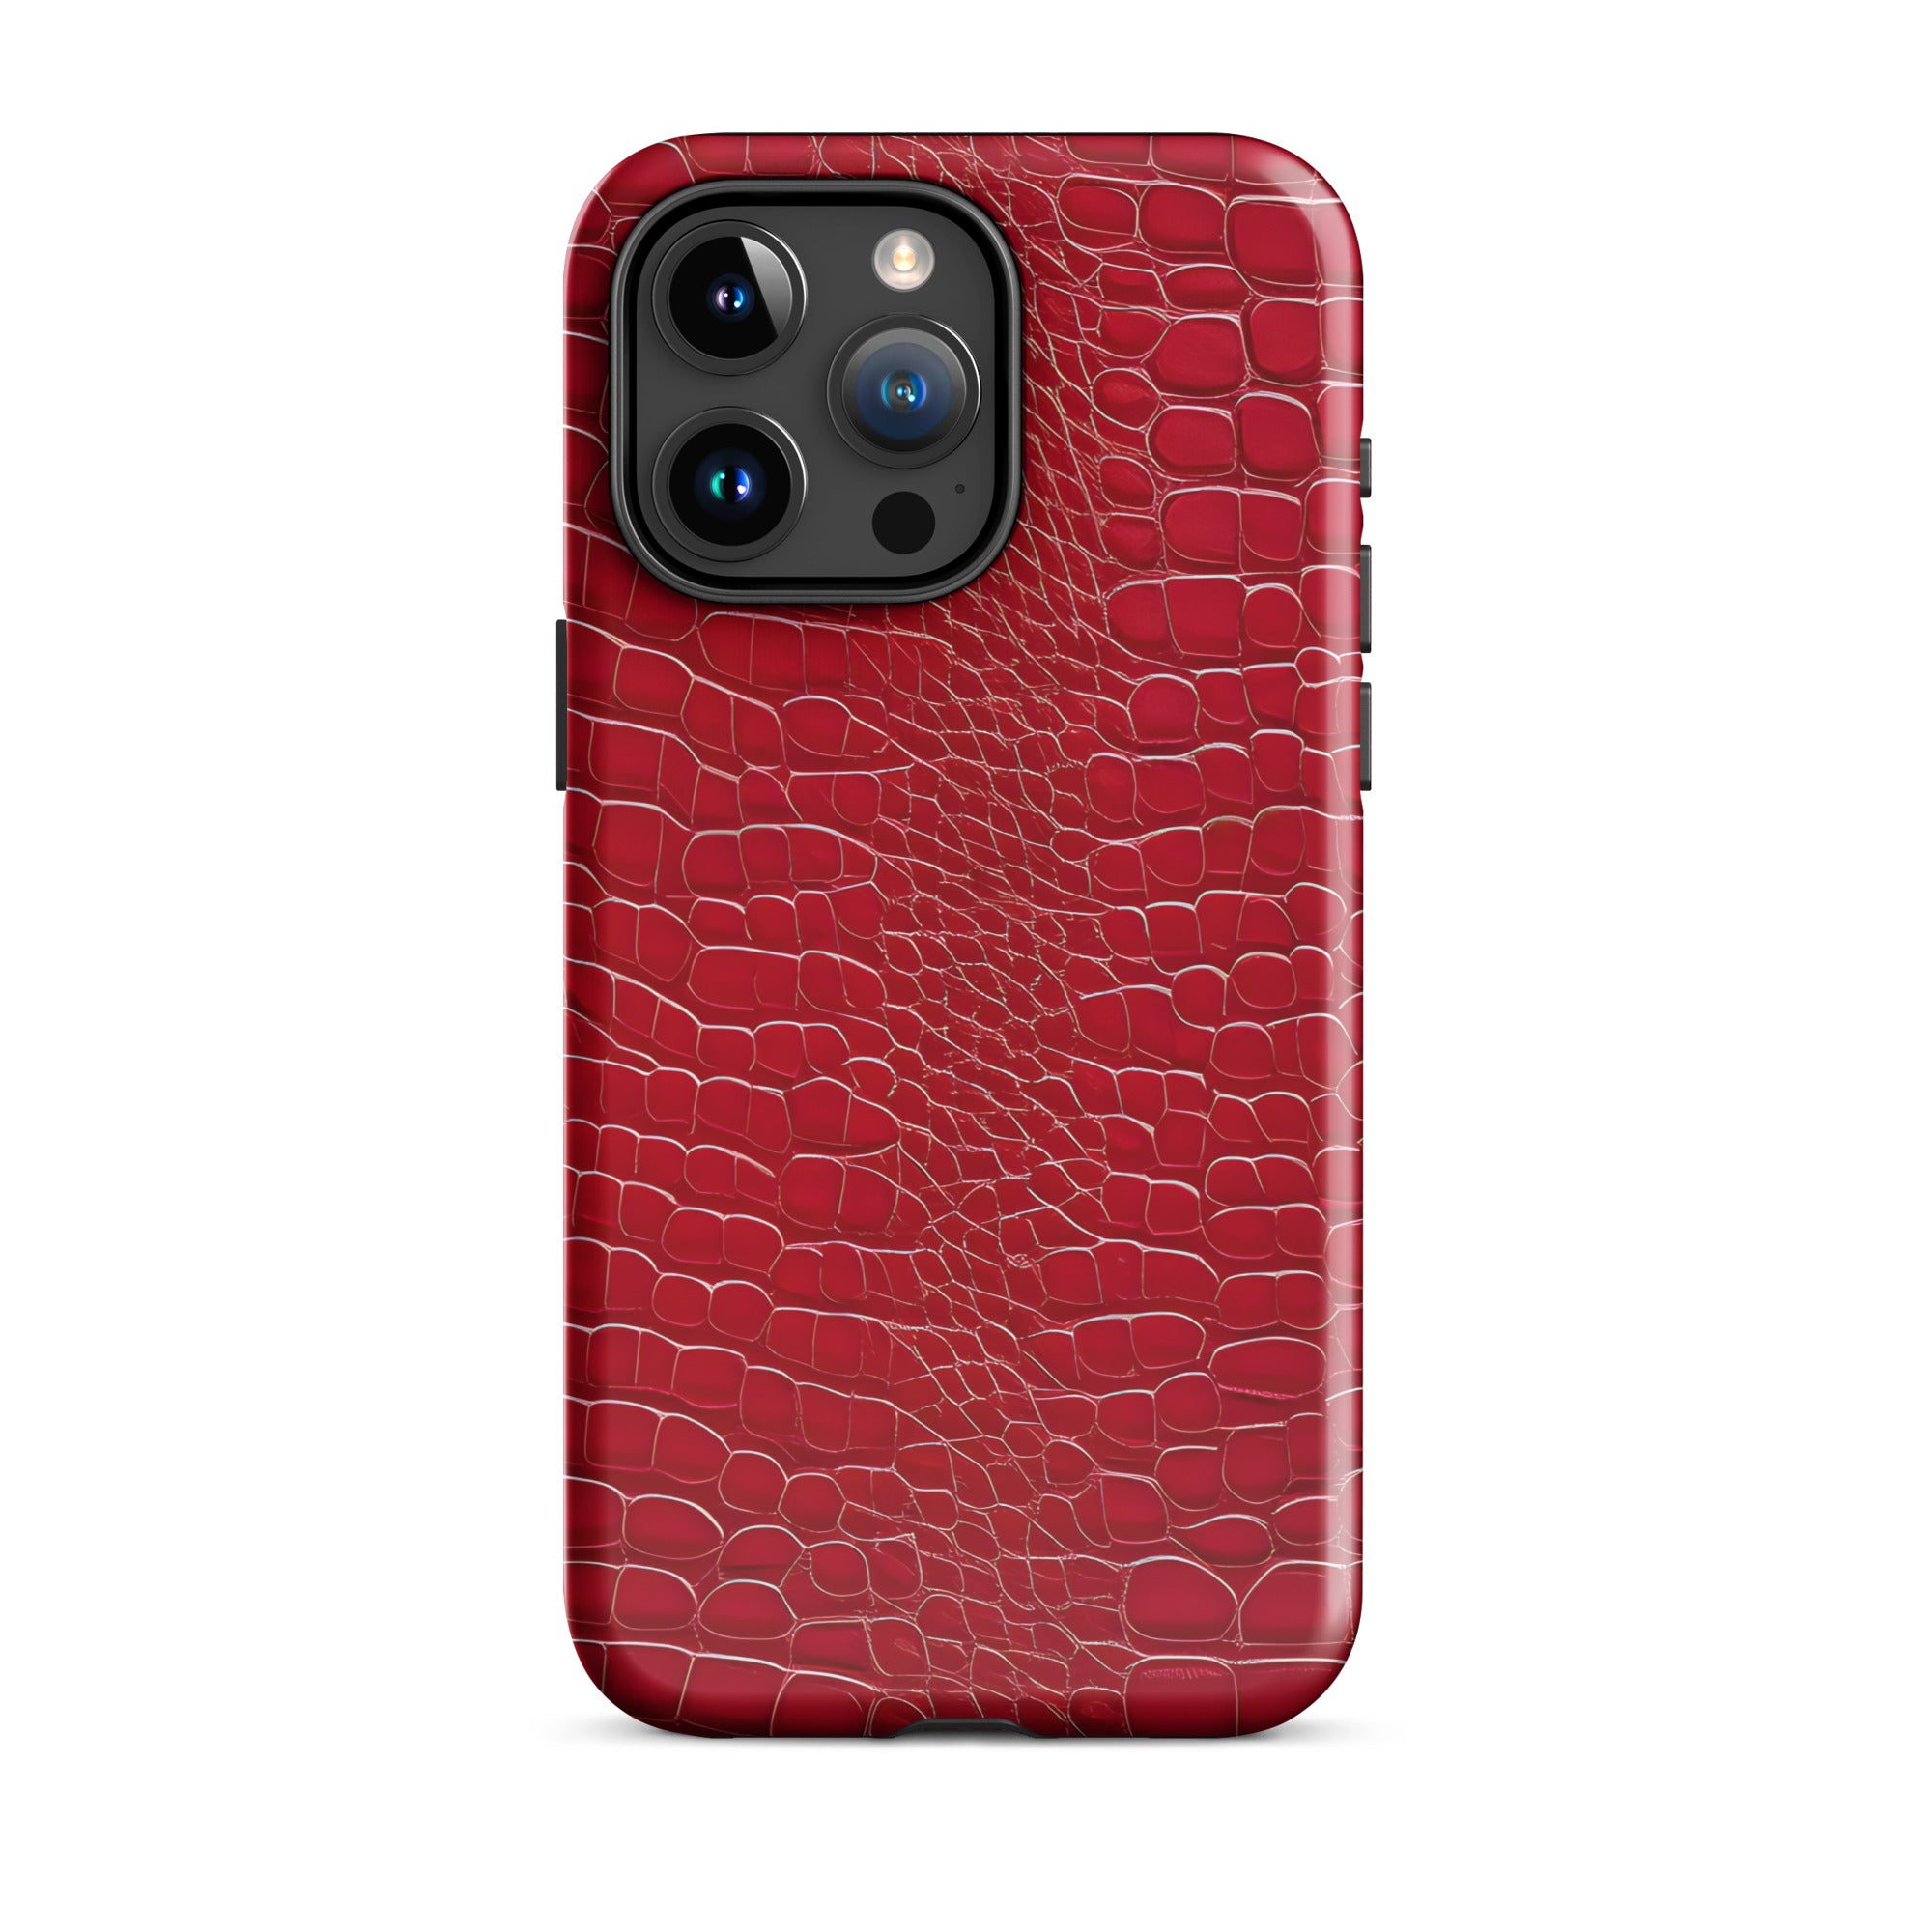 tough-case-for-iphone-glossy-iphone-15-pro-max-front-656383d5b5ea0.jpg